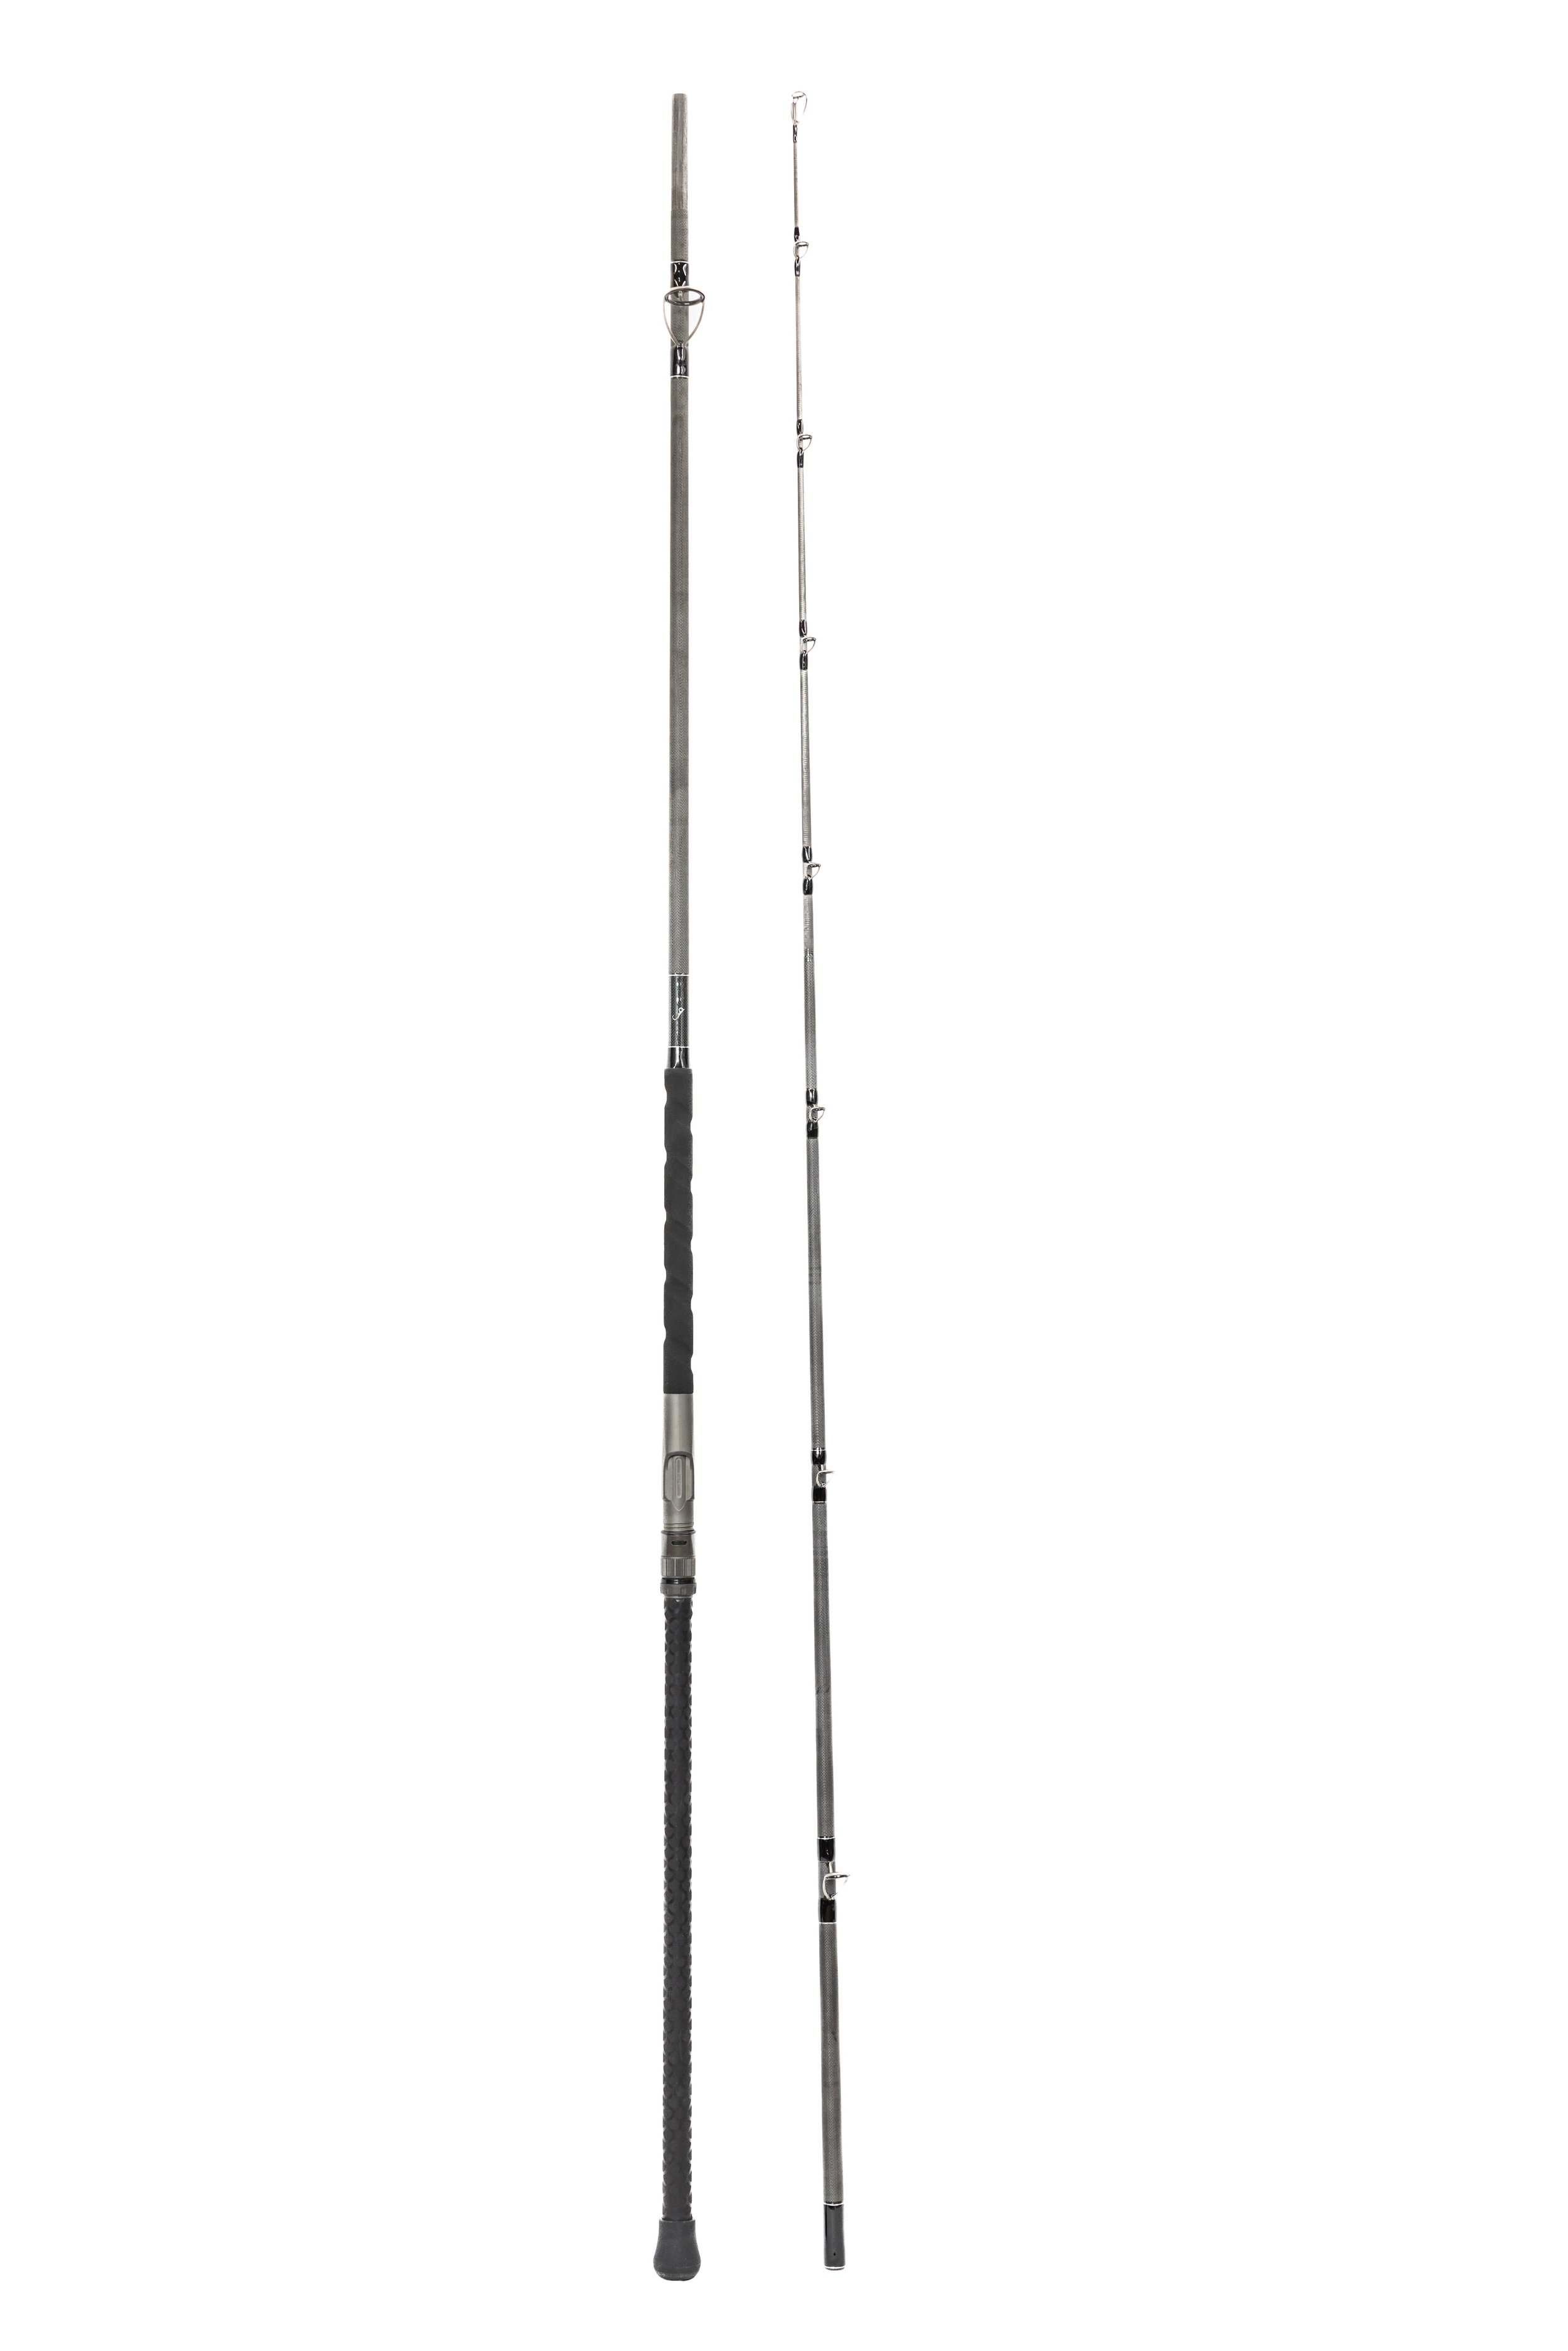 gw fishing rod, gw fishing rod Suppliers and Manufacturers at